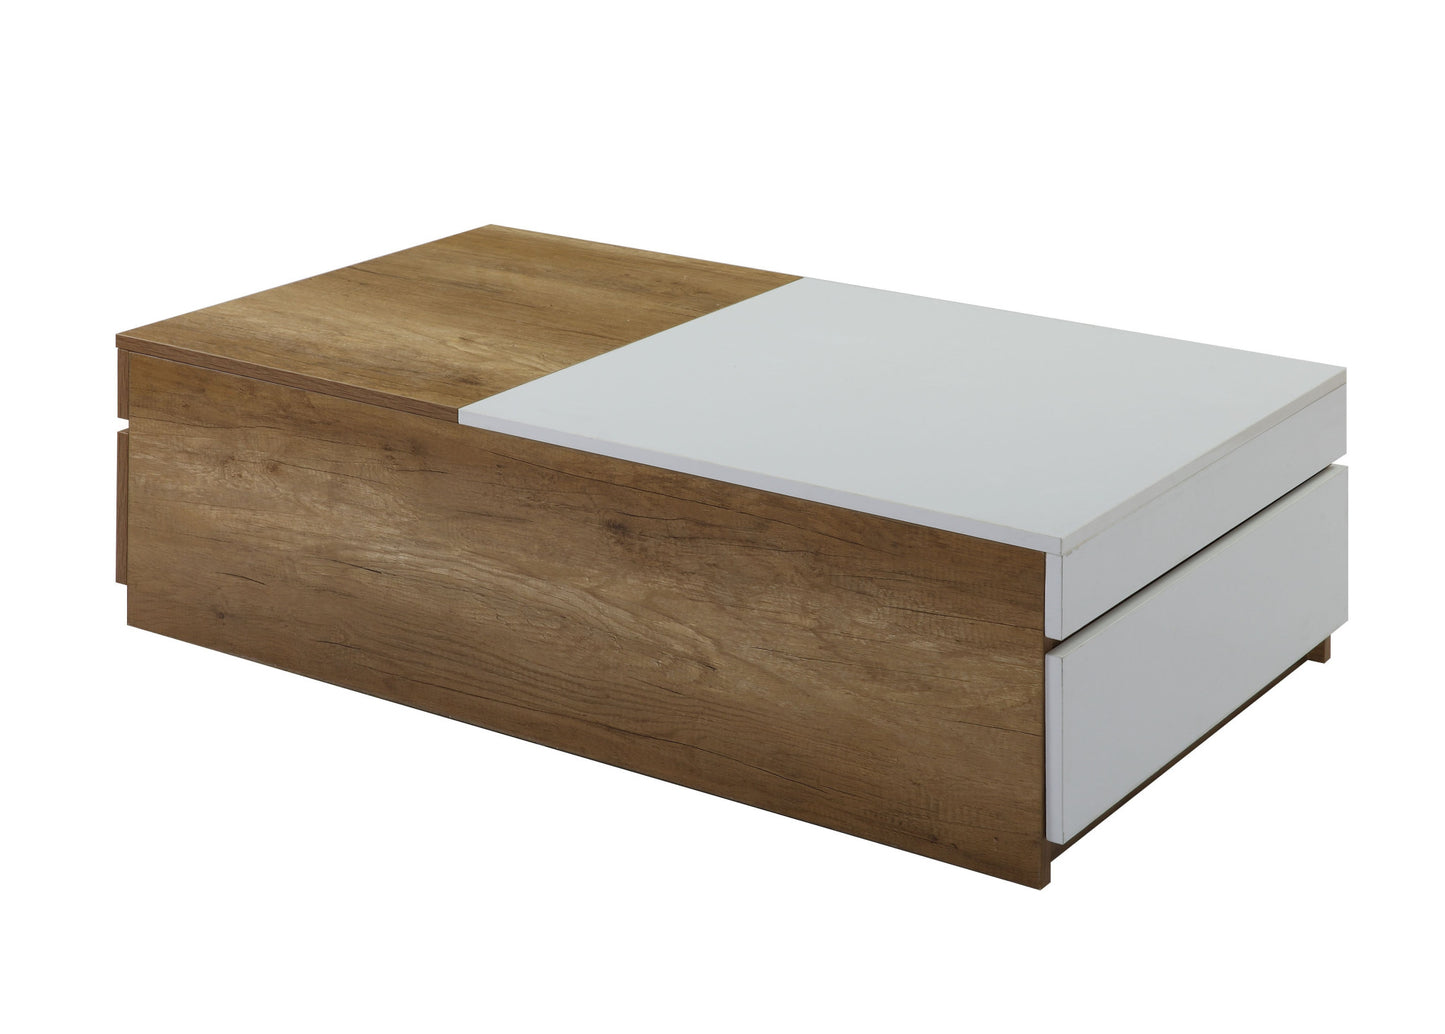 49" Oak And White Melamine Veneer And Manufactured Wood Rectangular Coffee Table With Two Drawers By Homeroots